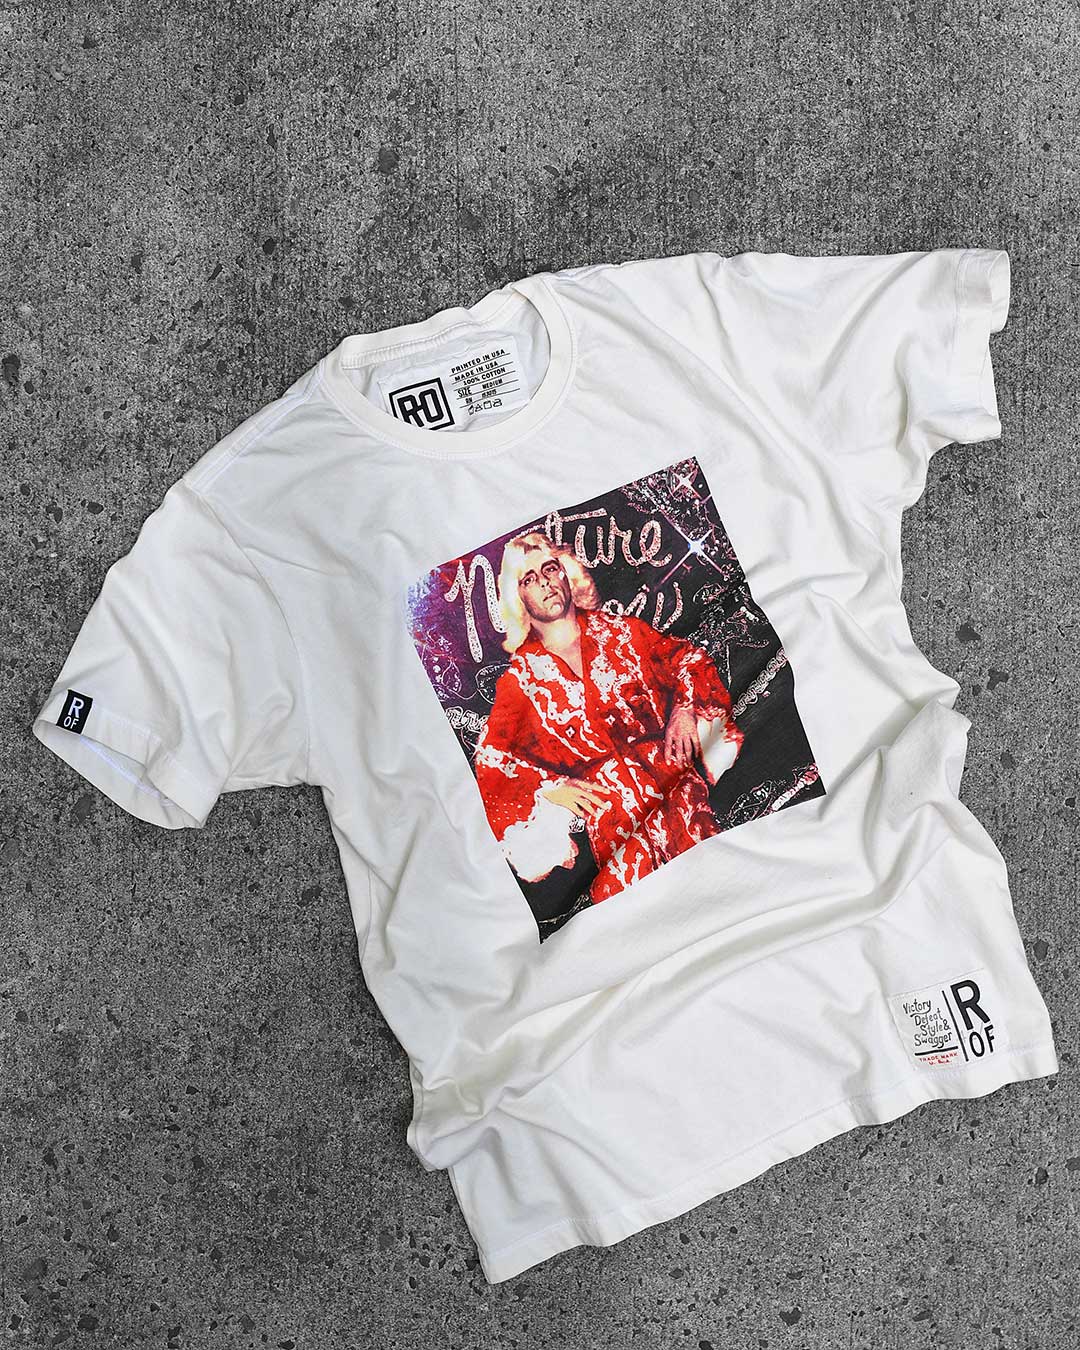 Ric Flair Retro Photo White Tee - Roots of Fight Canada